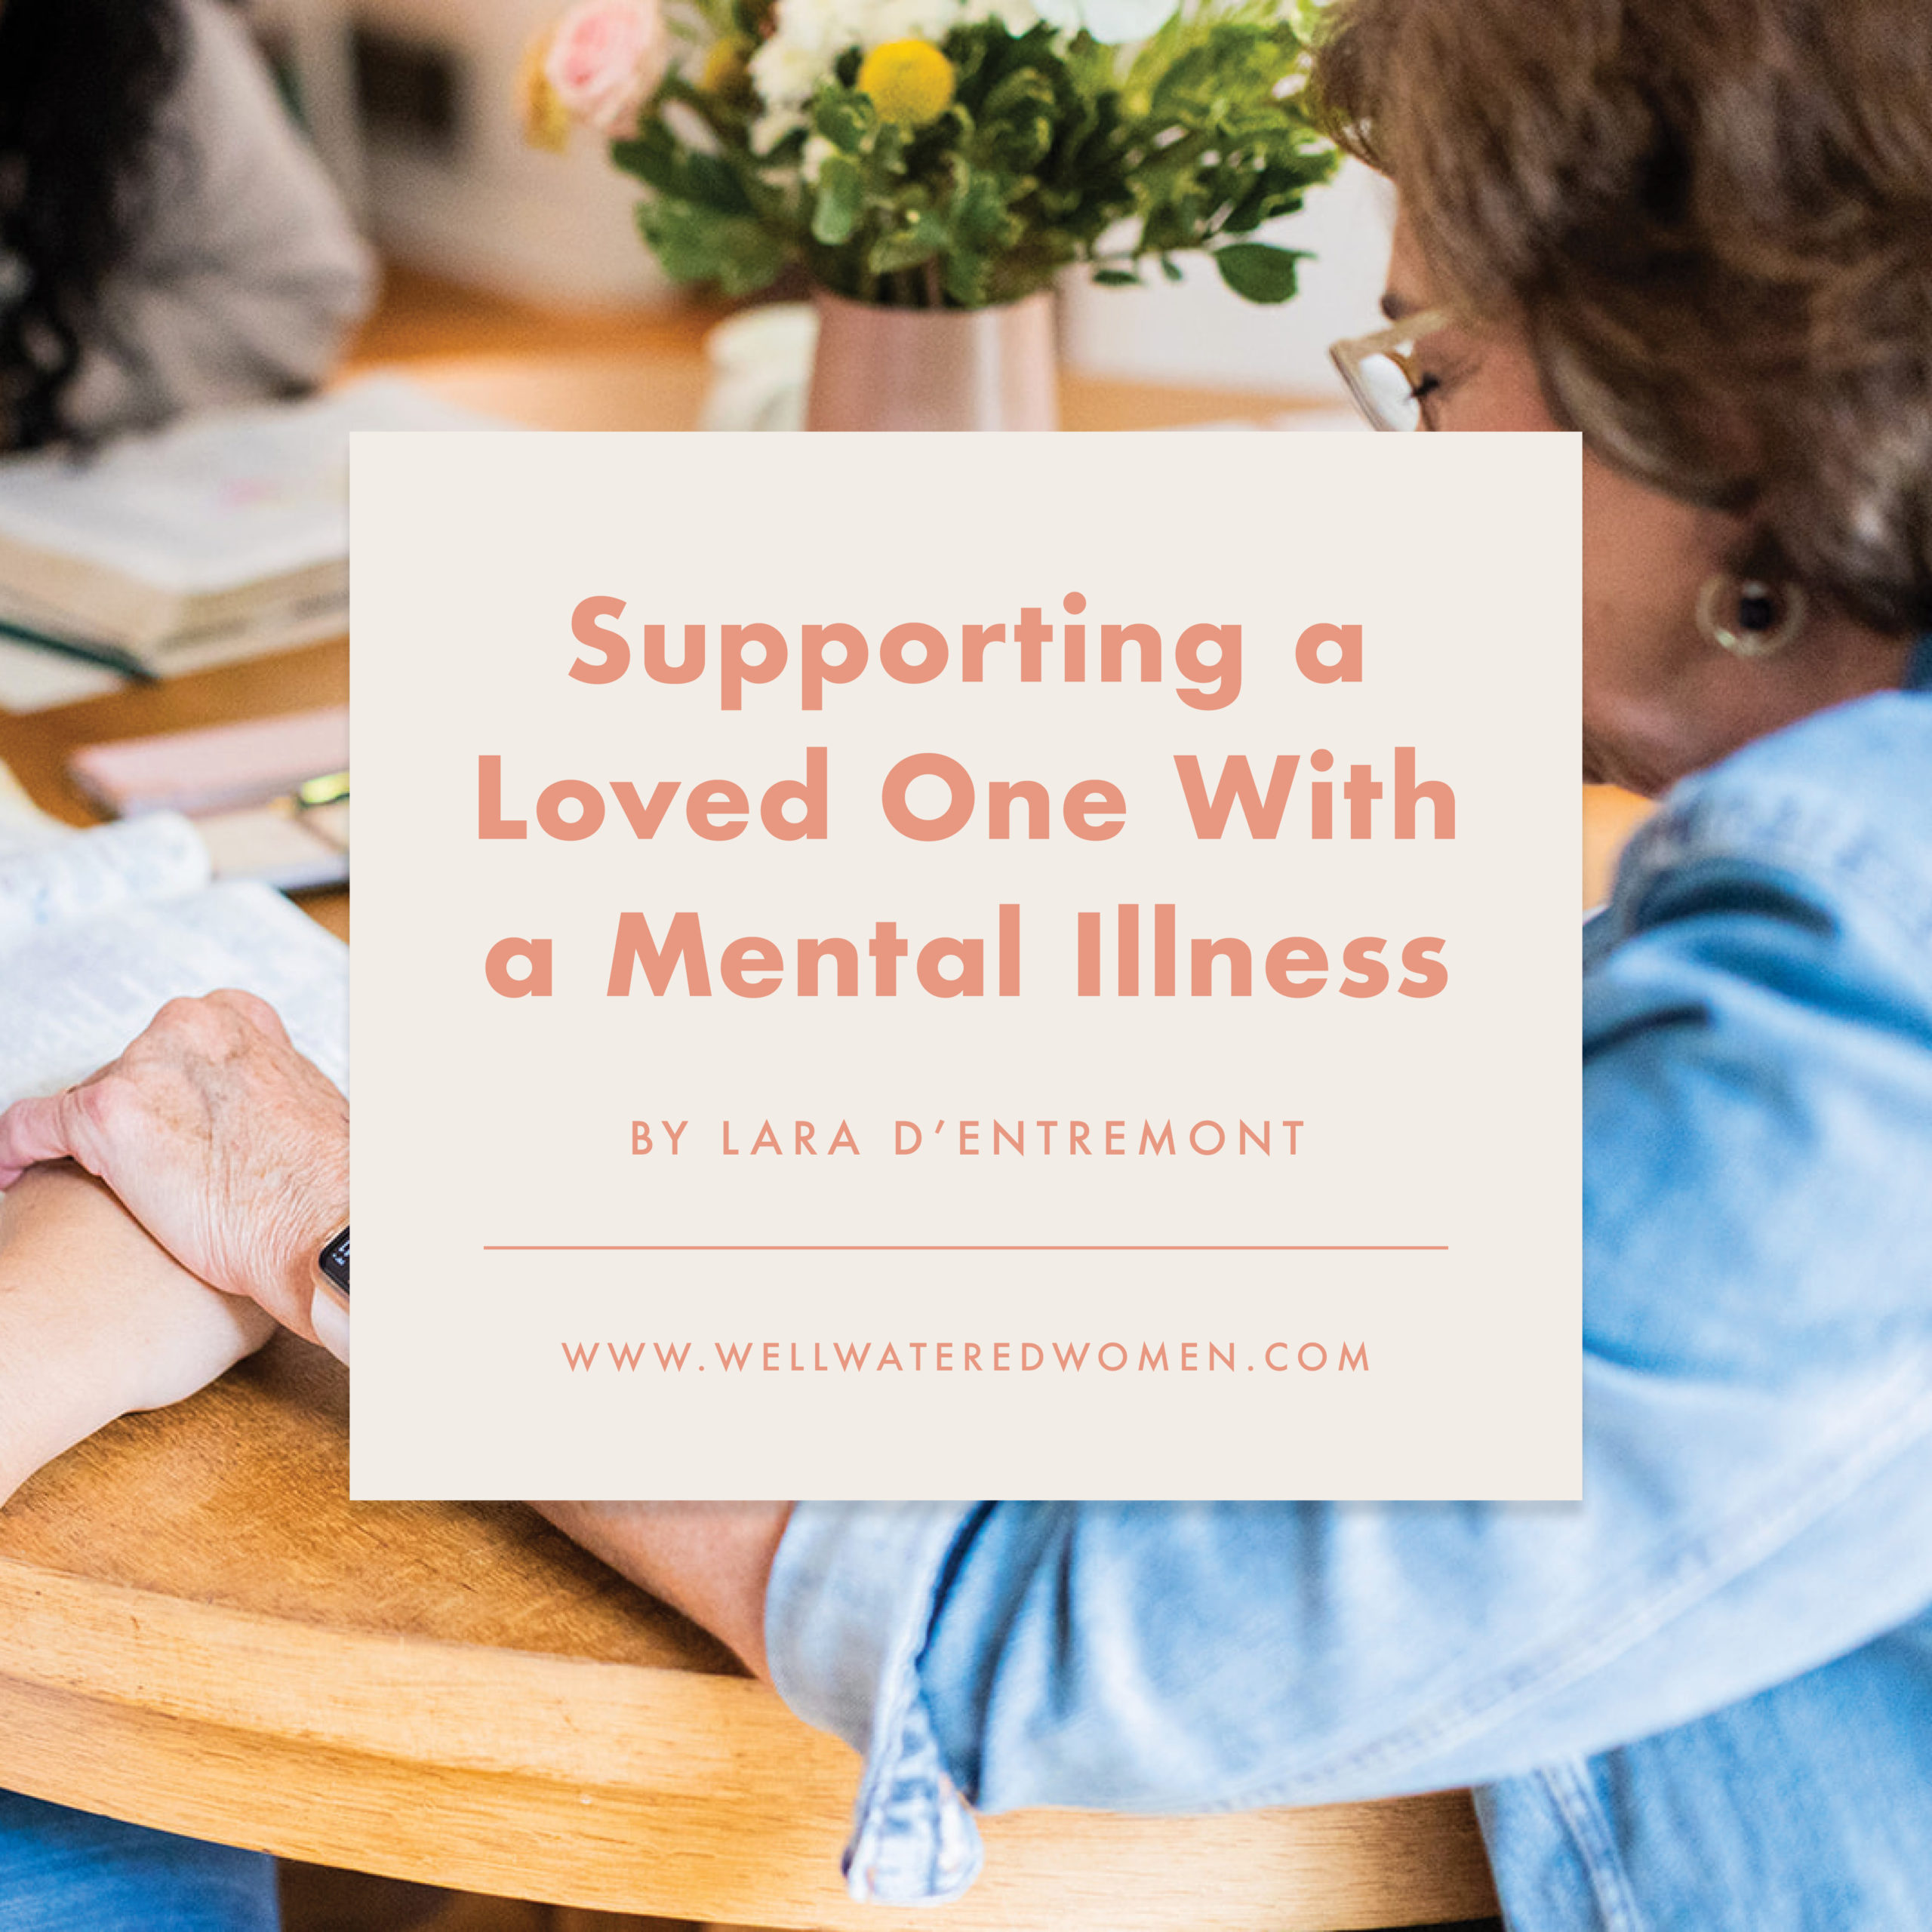 Supporting a Loved One With a Mental Illness - an article from Well-Watered Women